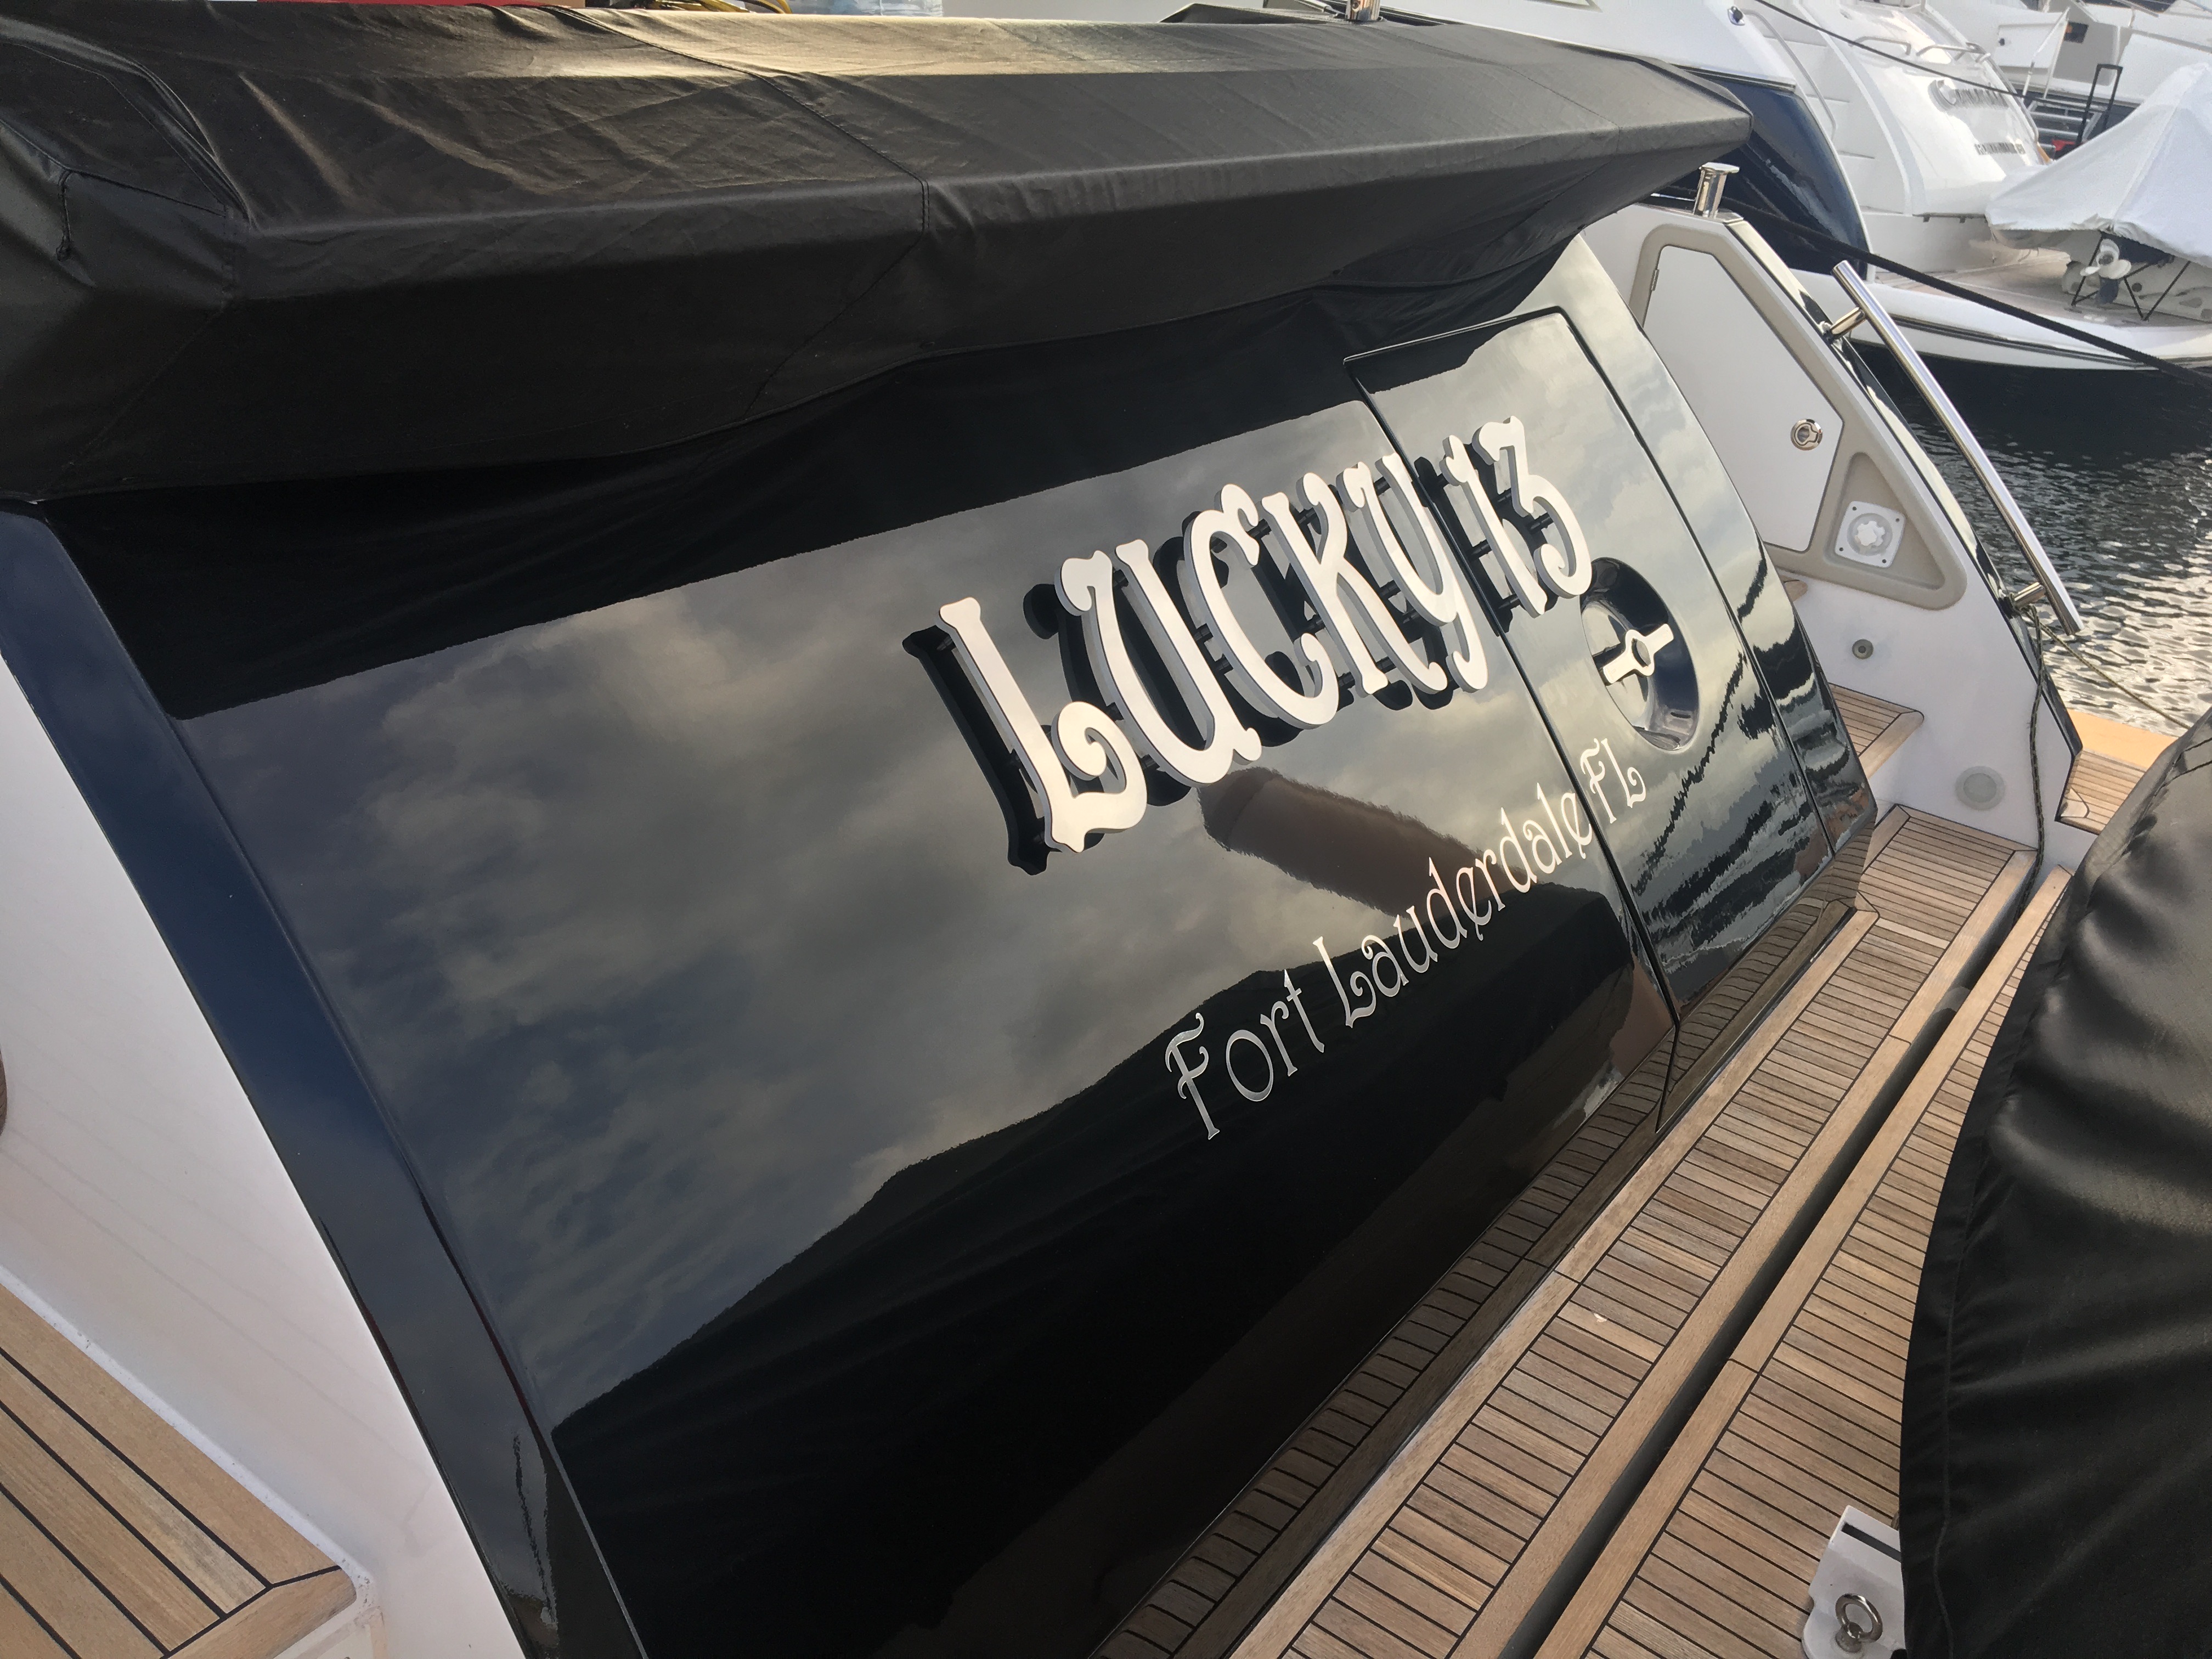 Transom of 66' Azimut with Lucky 13